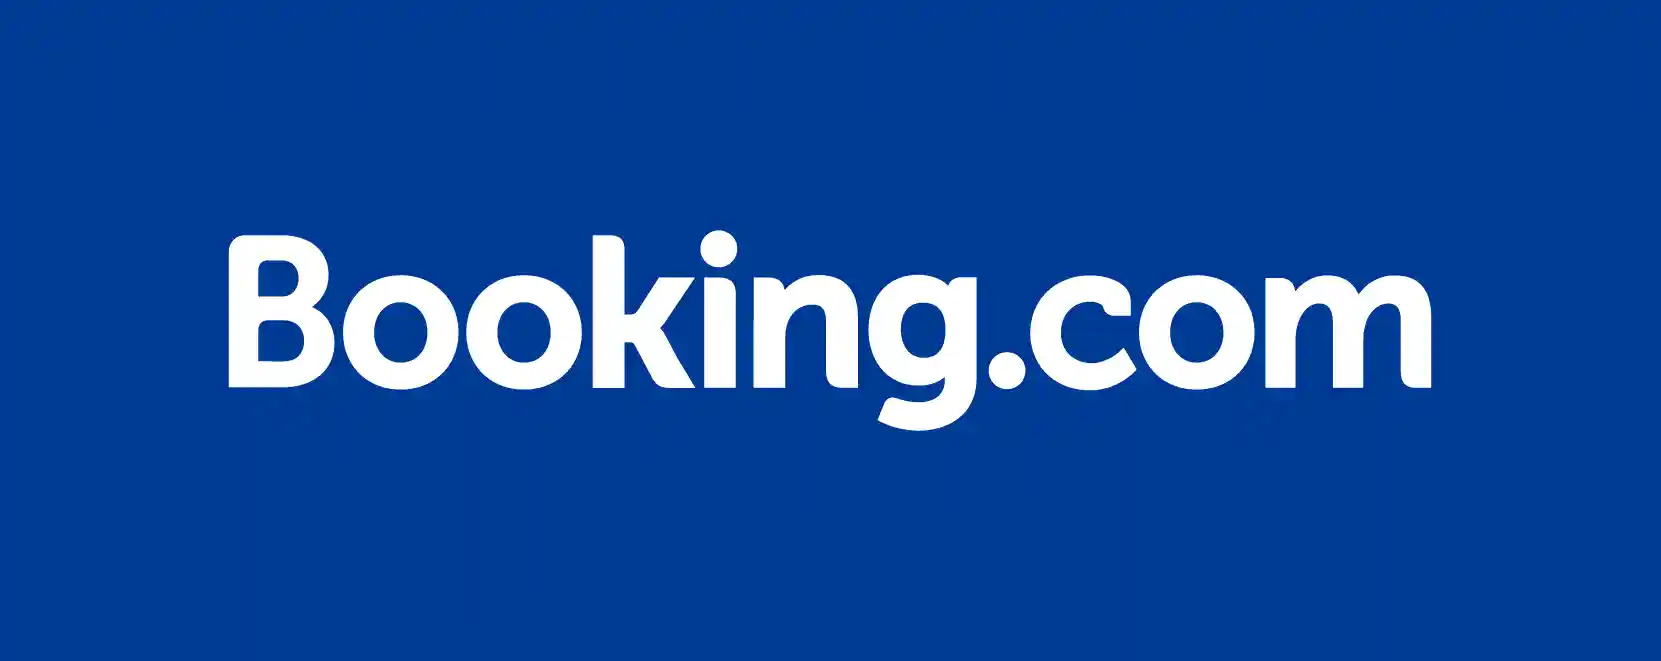 Booking.com Promotiecodes 